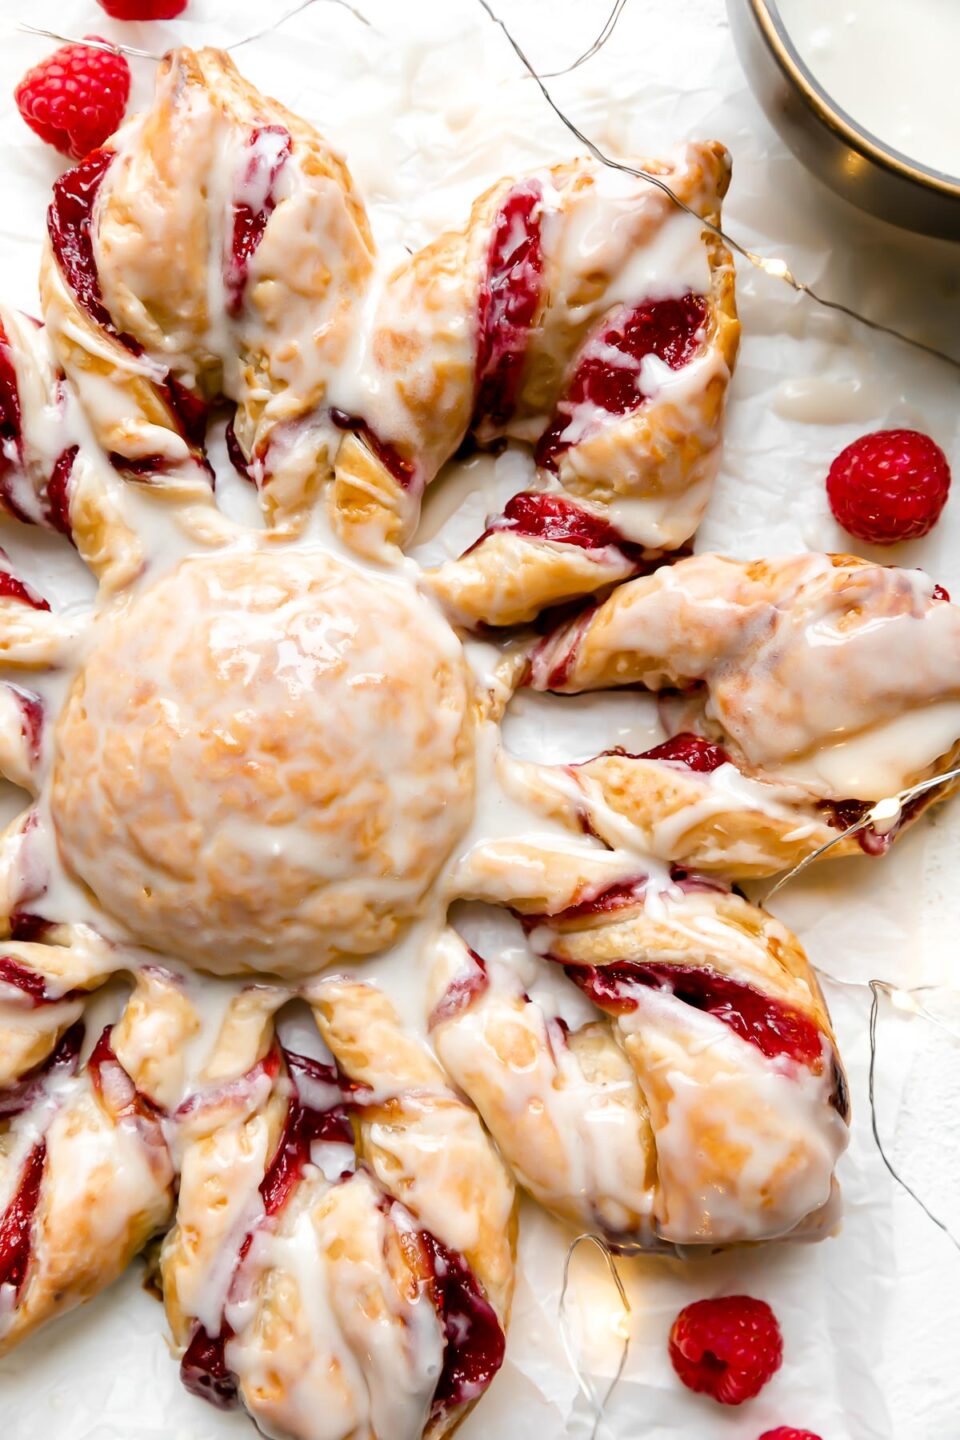 A Christmas Kringle Puff Pastry Star sits atop a piece of parchment paper. A string of twinkling lights, fresh raspberries, and a bowl of icing surround the pastry. The pastry sits atop a creamy white textured surface.